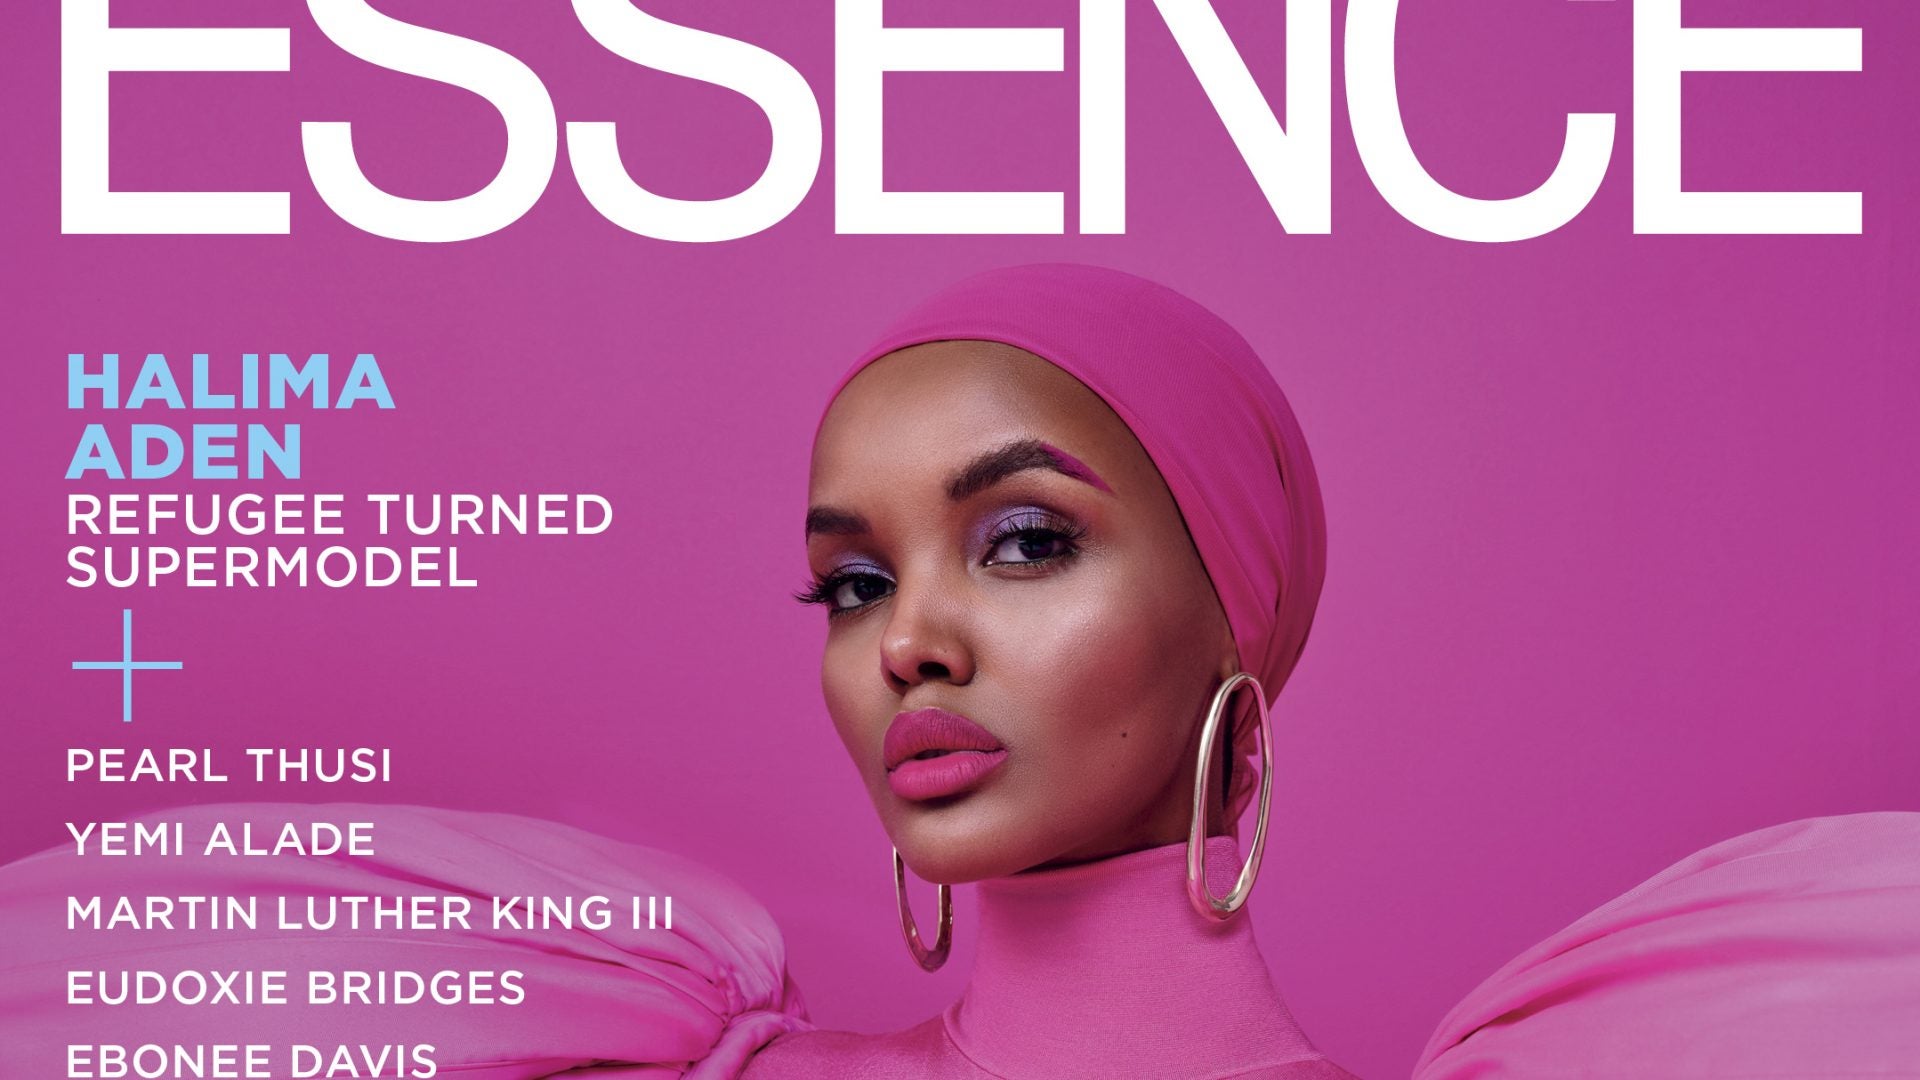 First Look: Model Halima Aden Celebrates Disrupting Traditional Beauty Standards On January 2020 Cover Of ESSENCE